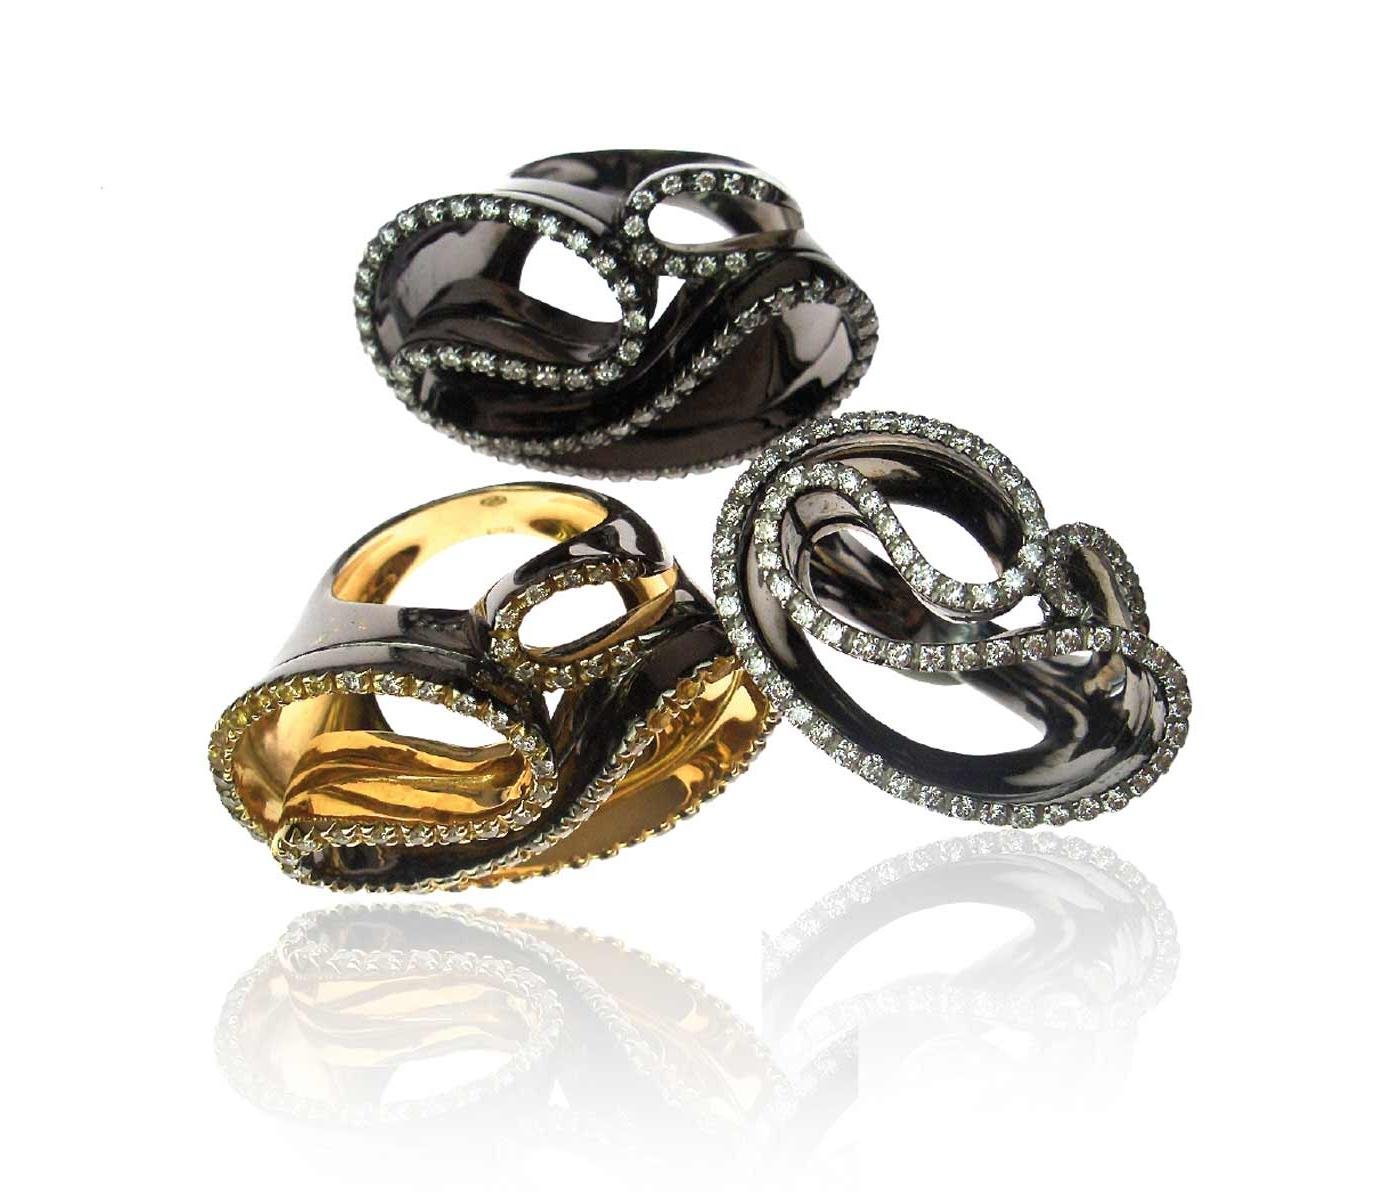 Rings by Marroni Design